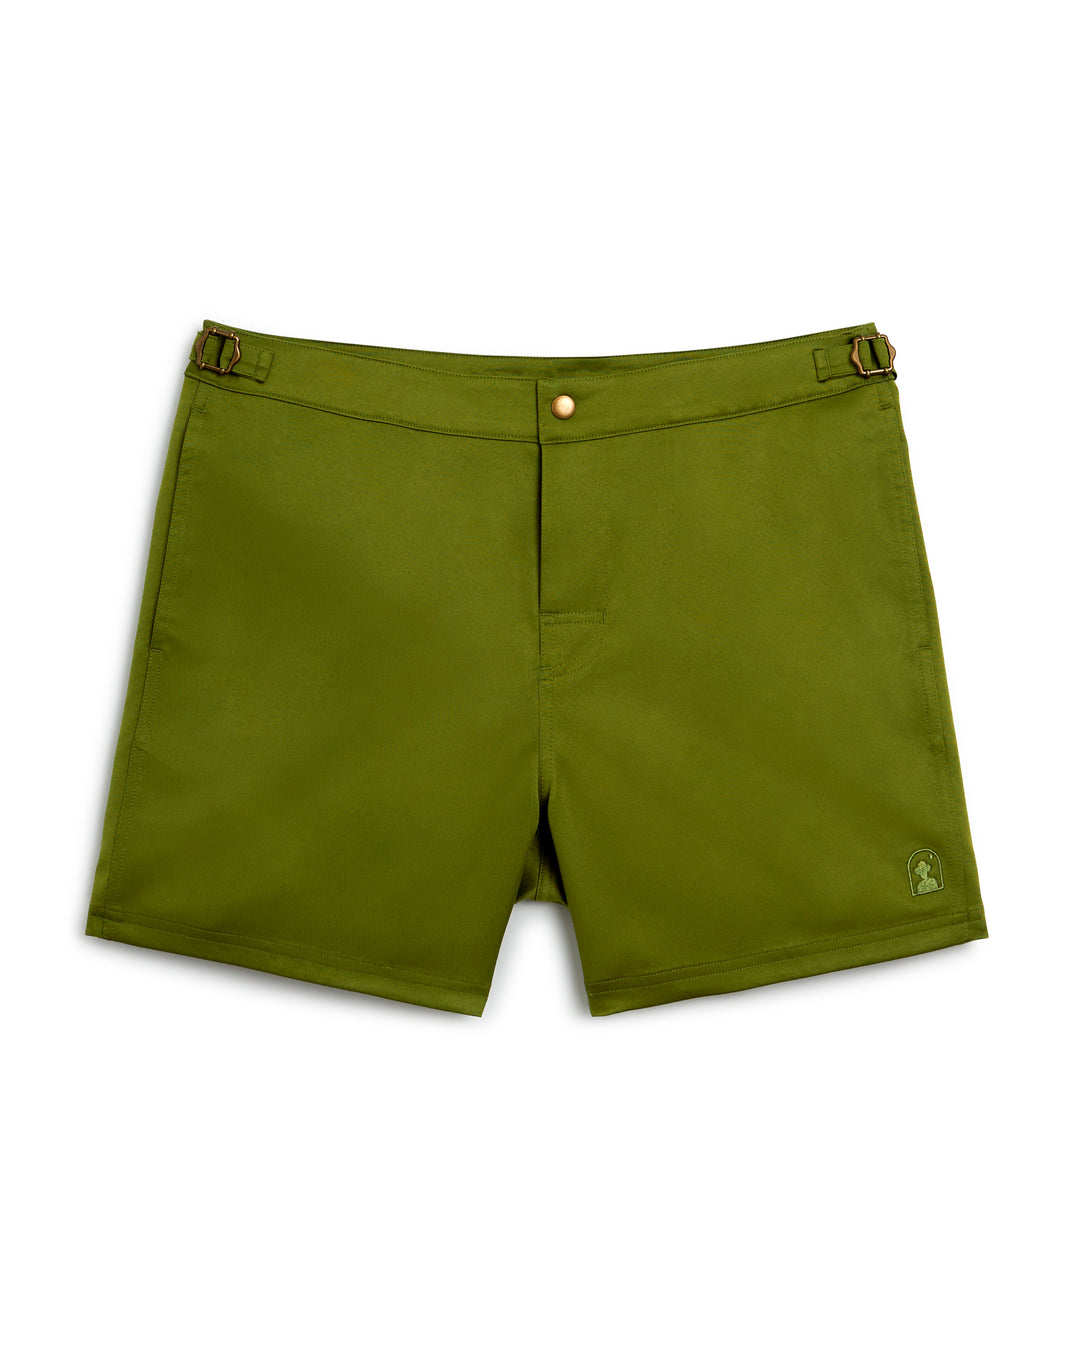 The Mallorca Short - Arbequina by Dandy Del Mar in olive green.